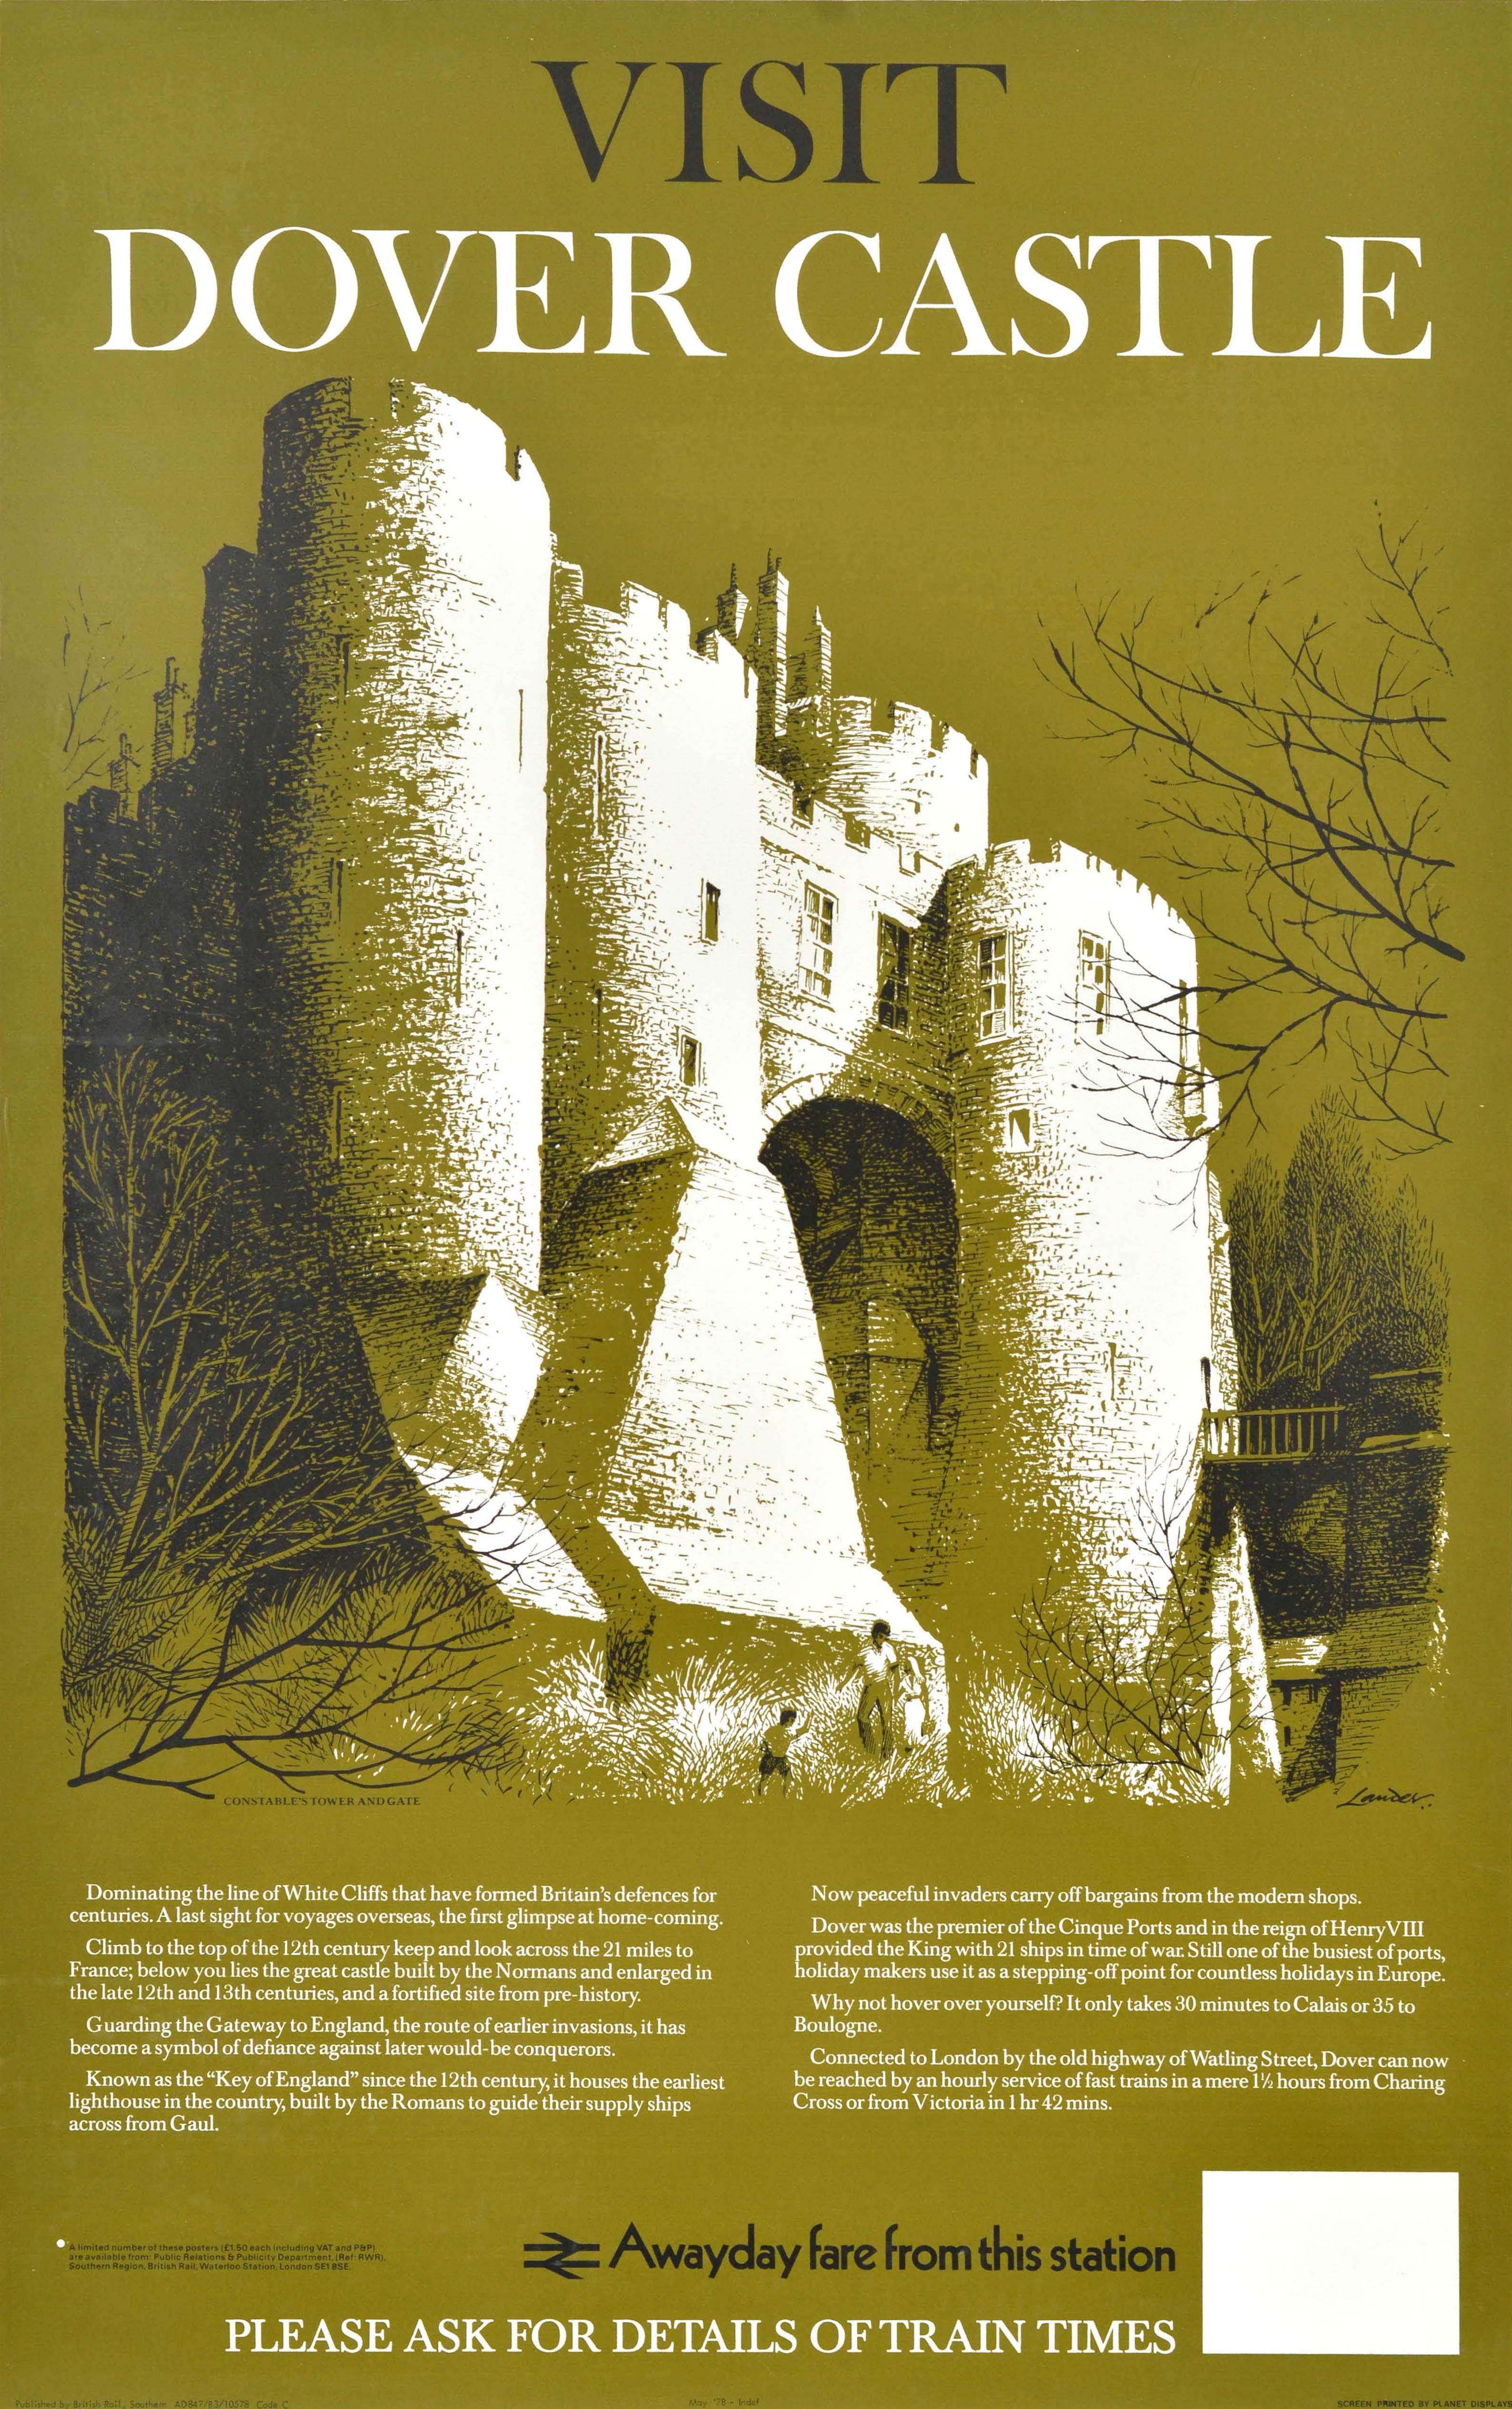 Original vintage train travel poster - Visit Dover Castle - featuring artwork by the notable commercial artist and poster designer Reginald Montague Lander (1913-1980) depicting a family walking around the historic Constable's Tower and Gate of the